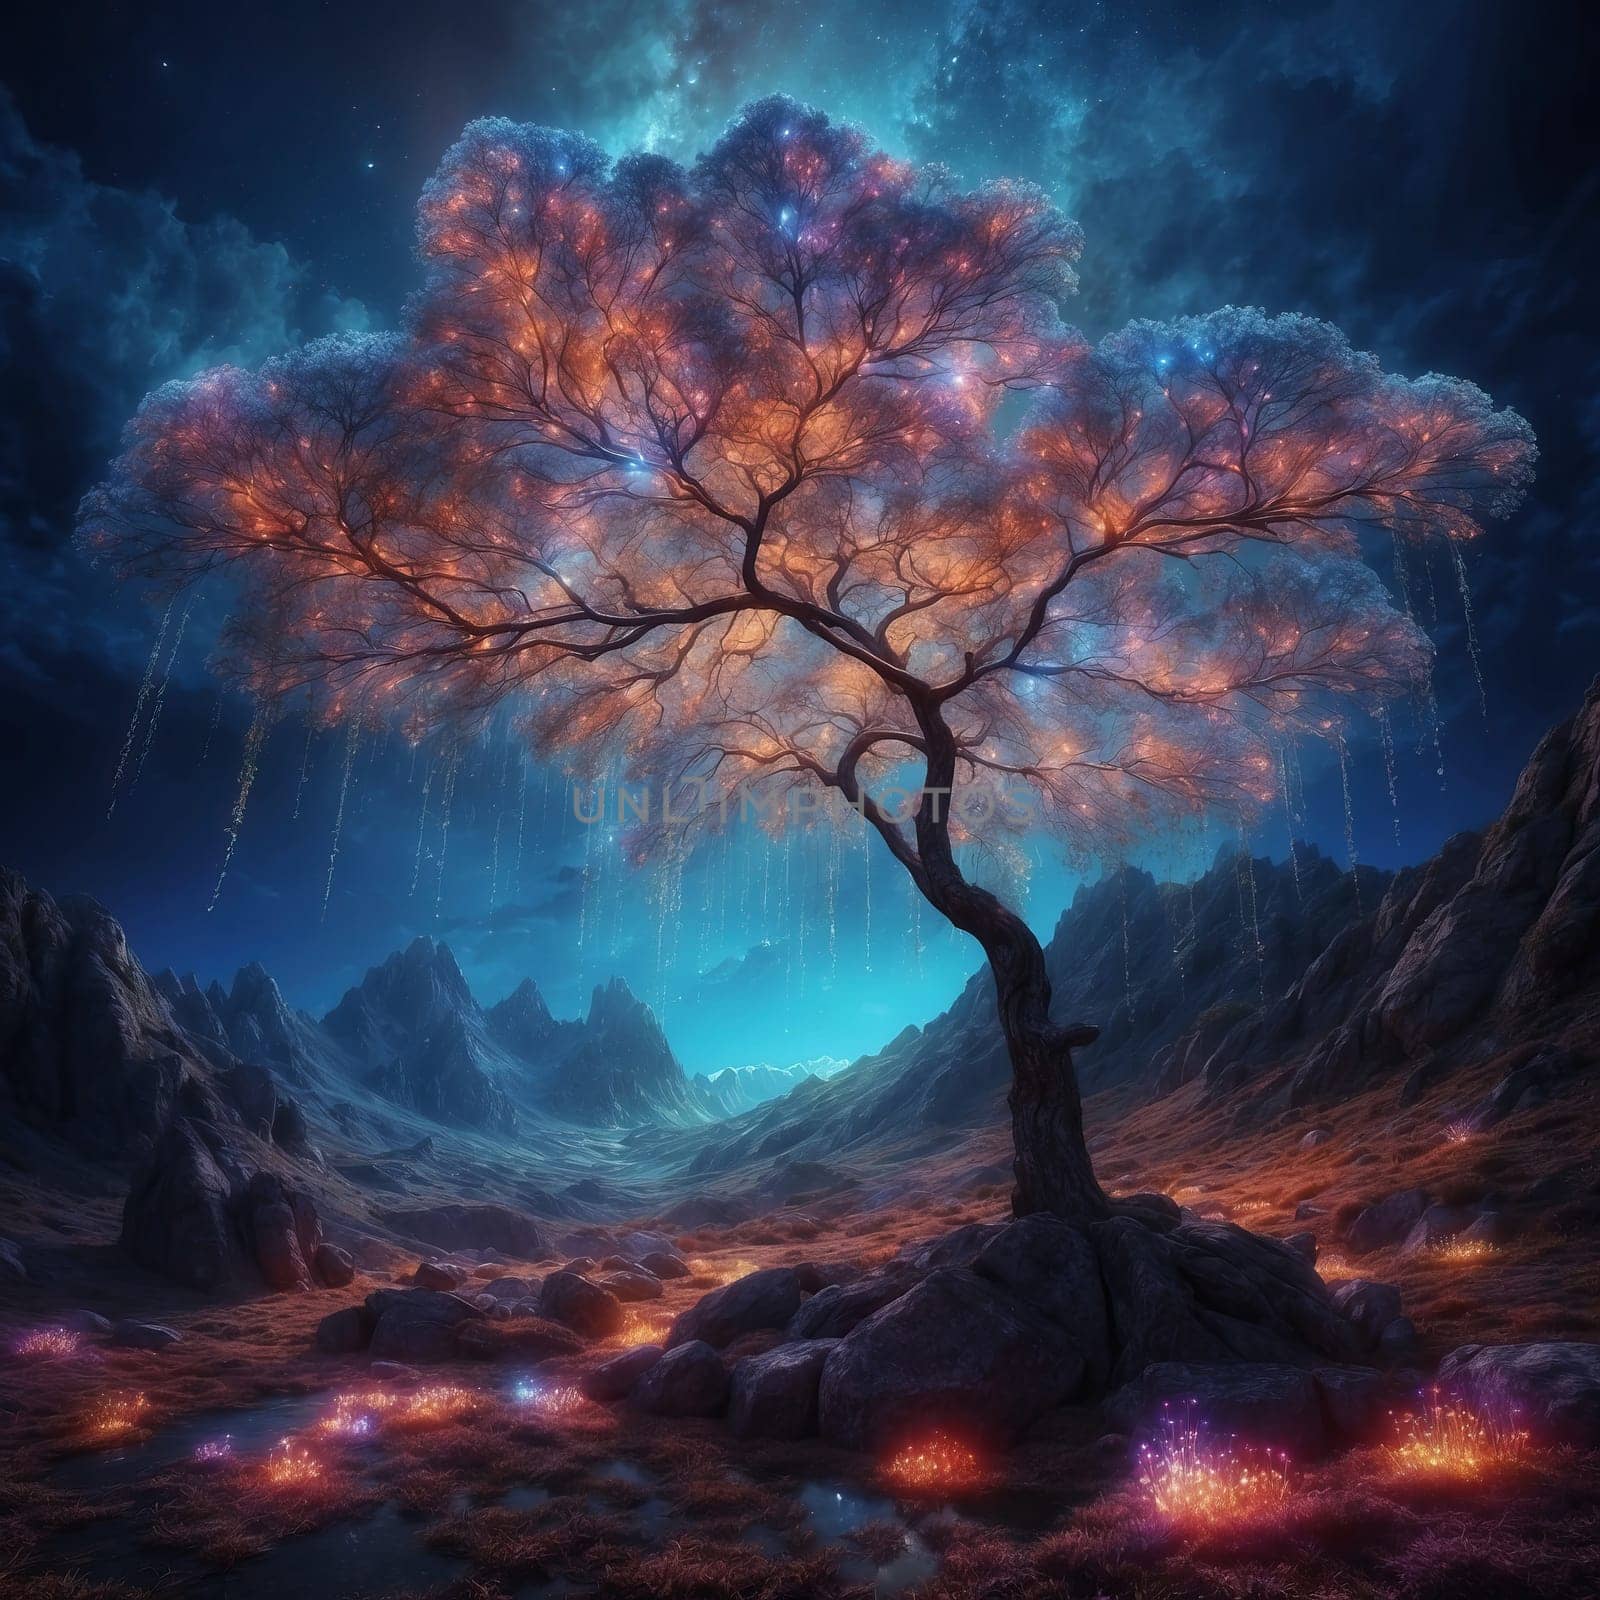 Magic tree in the light of the stars by applesstock